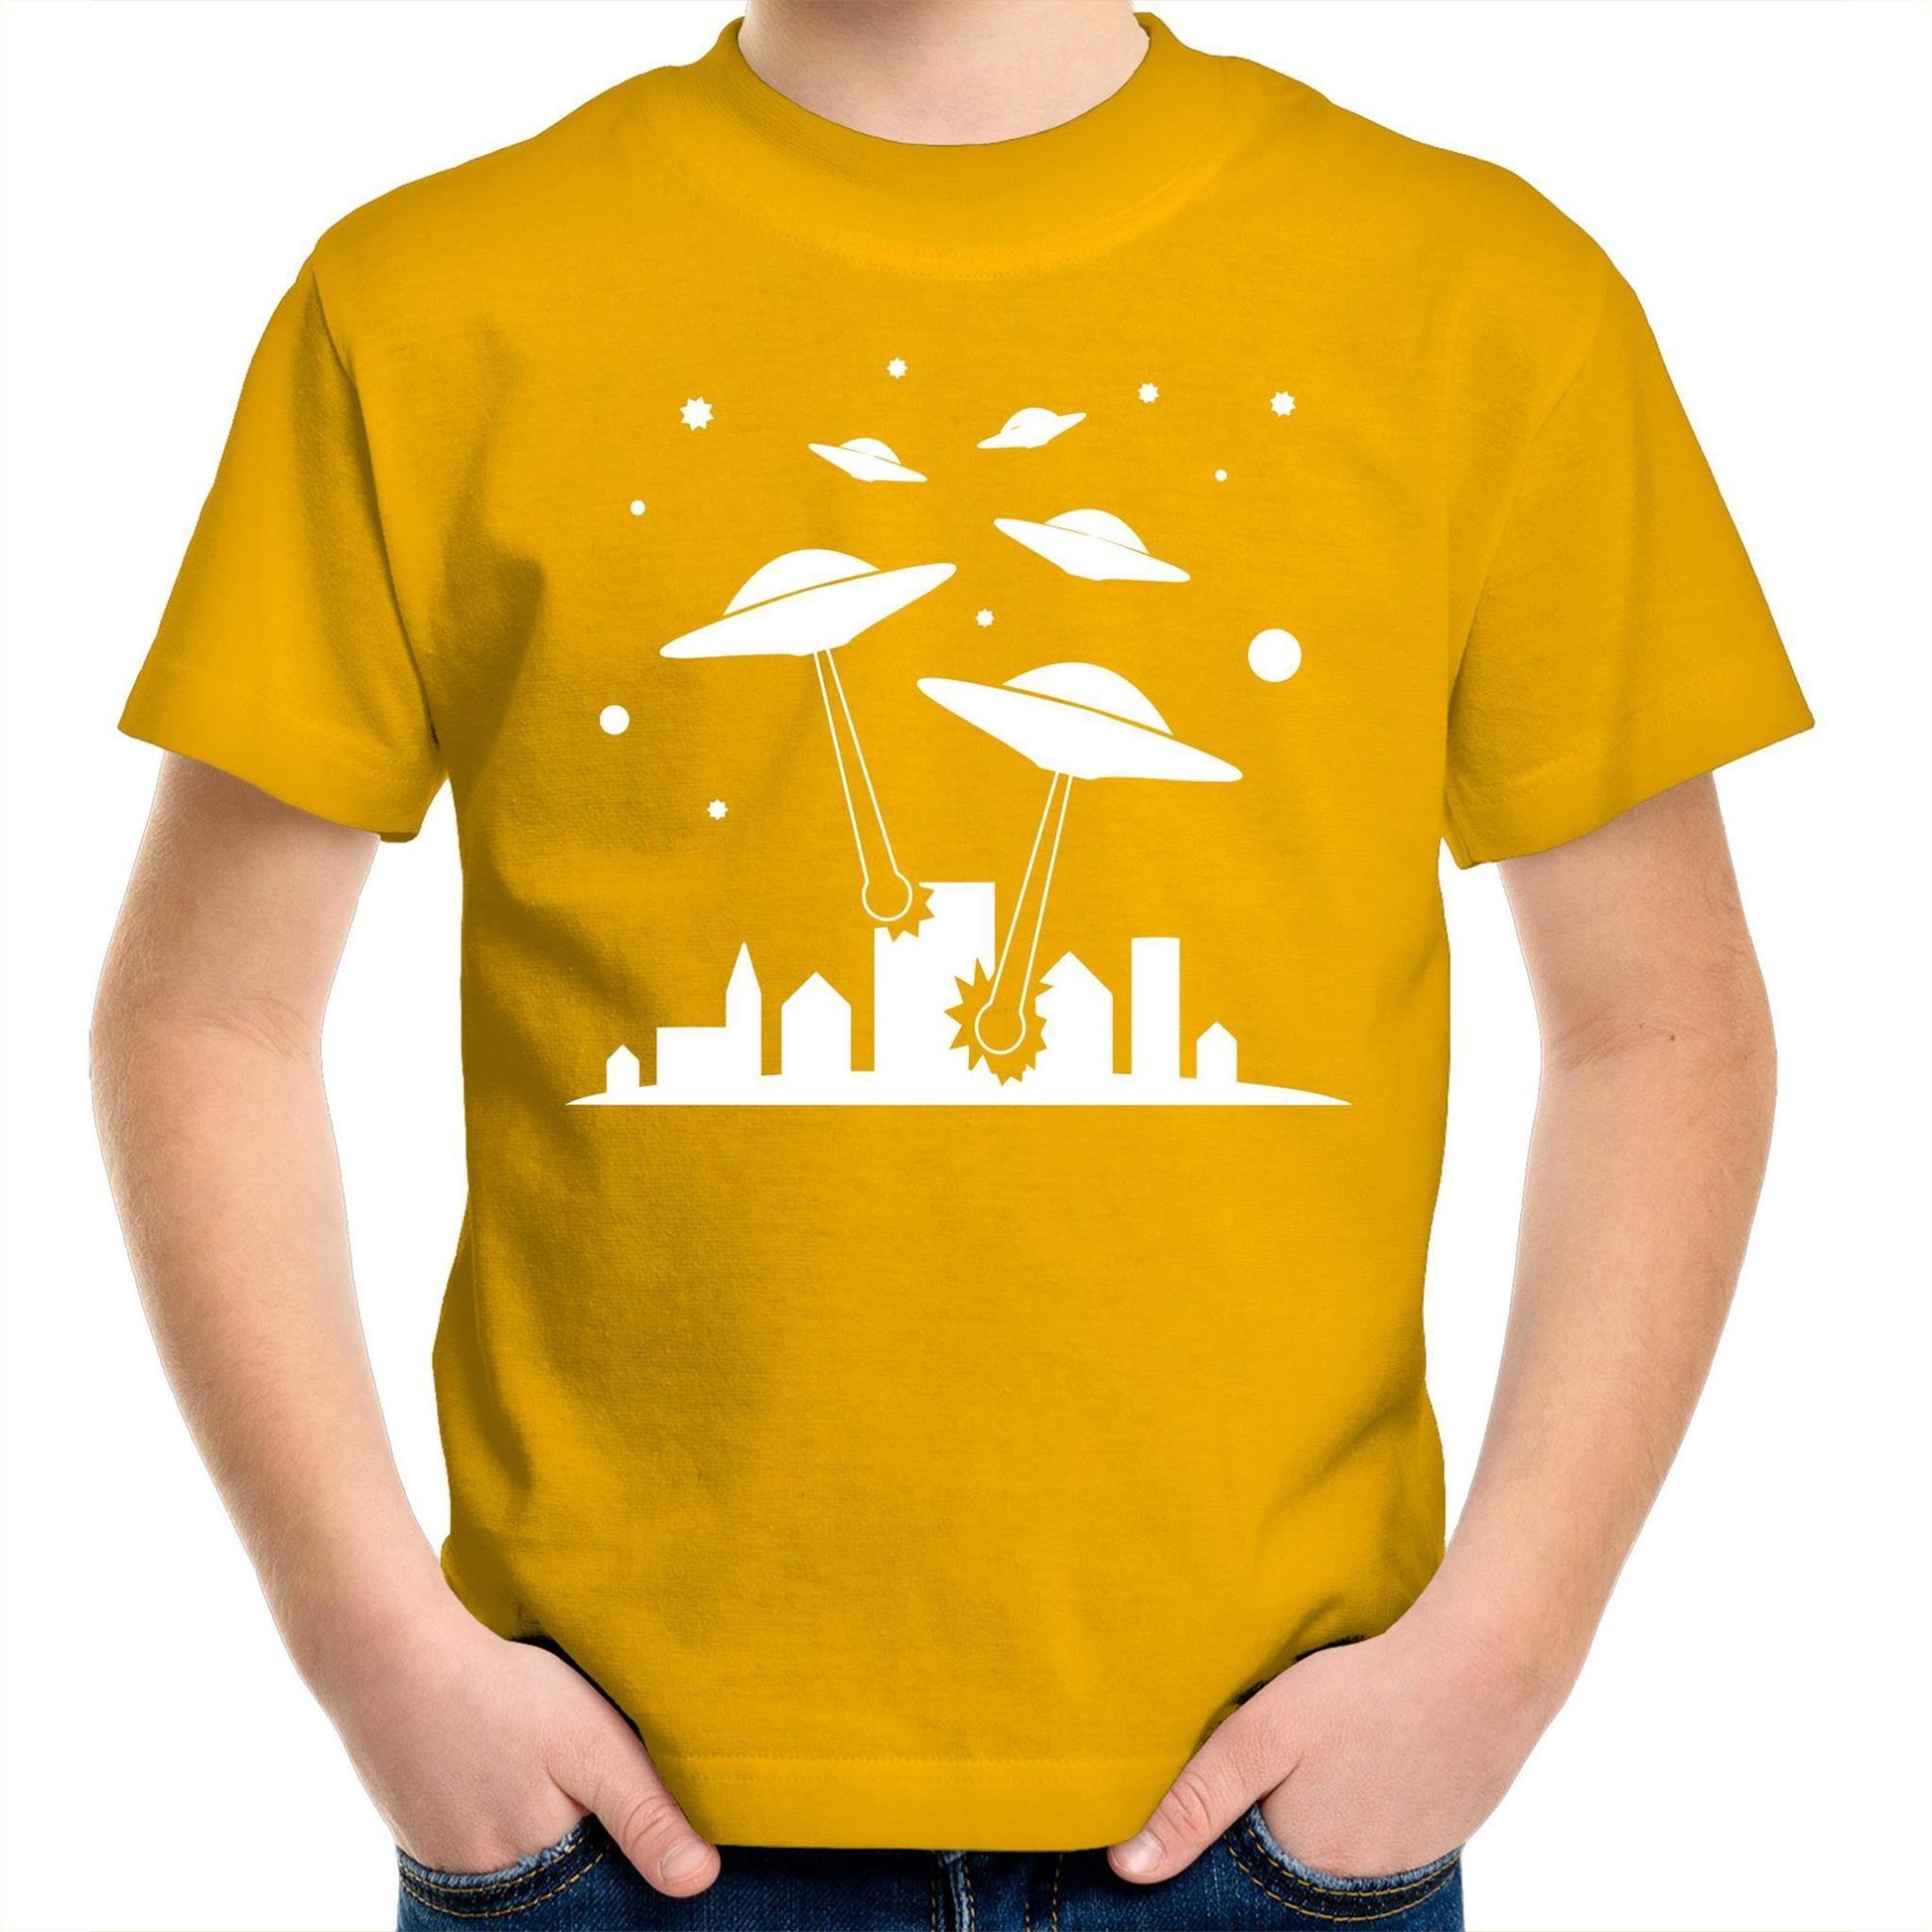 Space Invasion - Kids Youth Crew T-Shirt Gold Kids Youth T-shirt